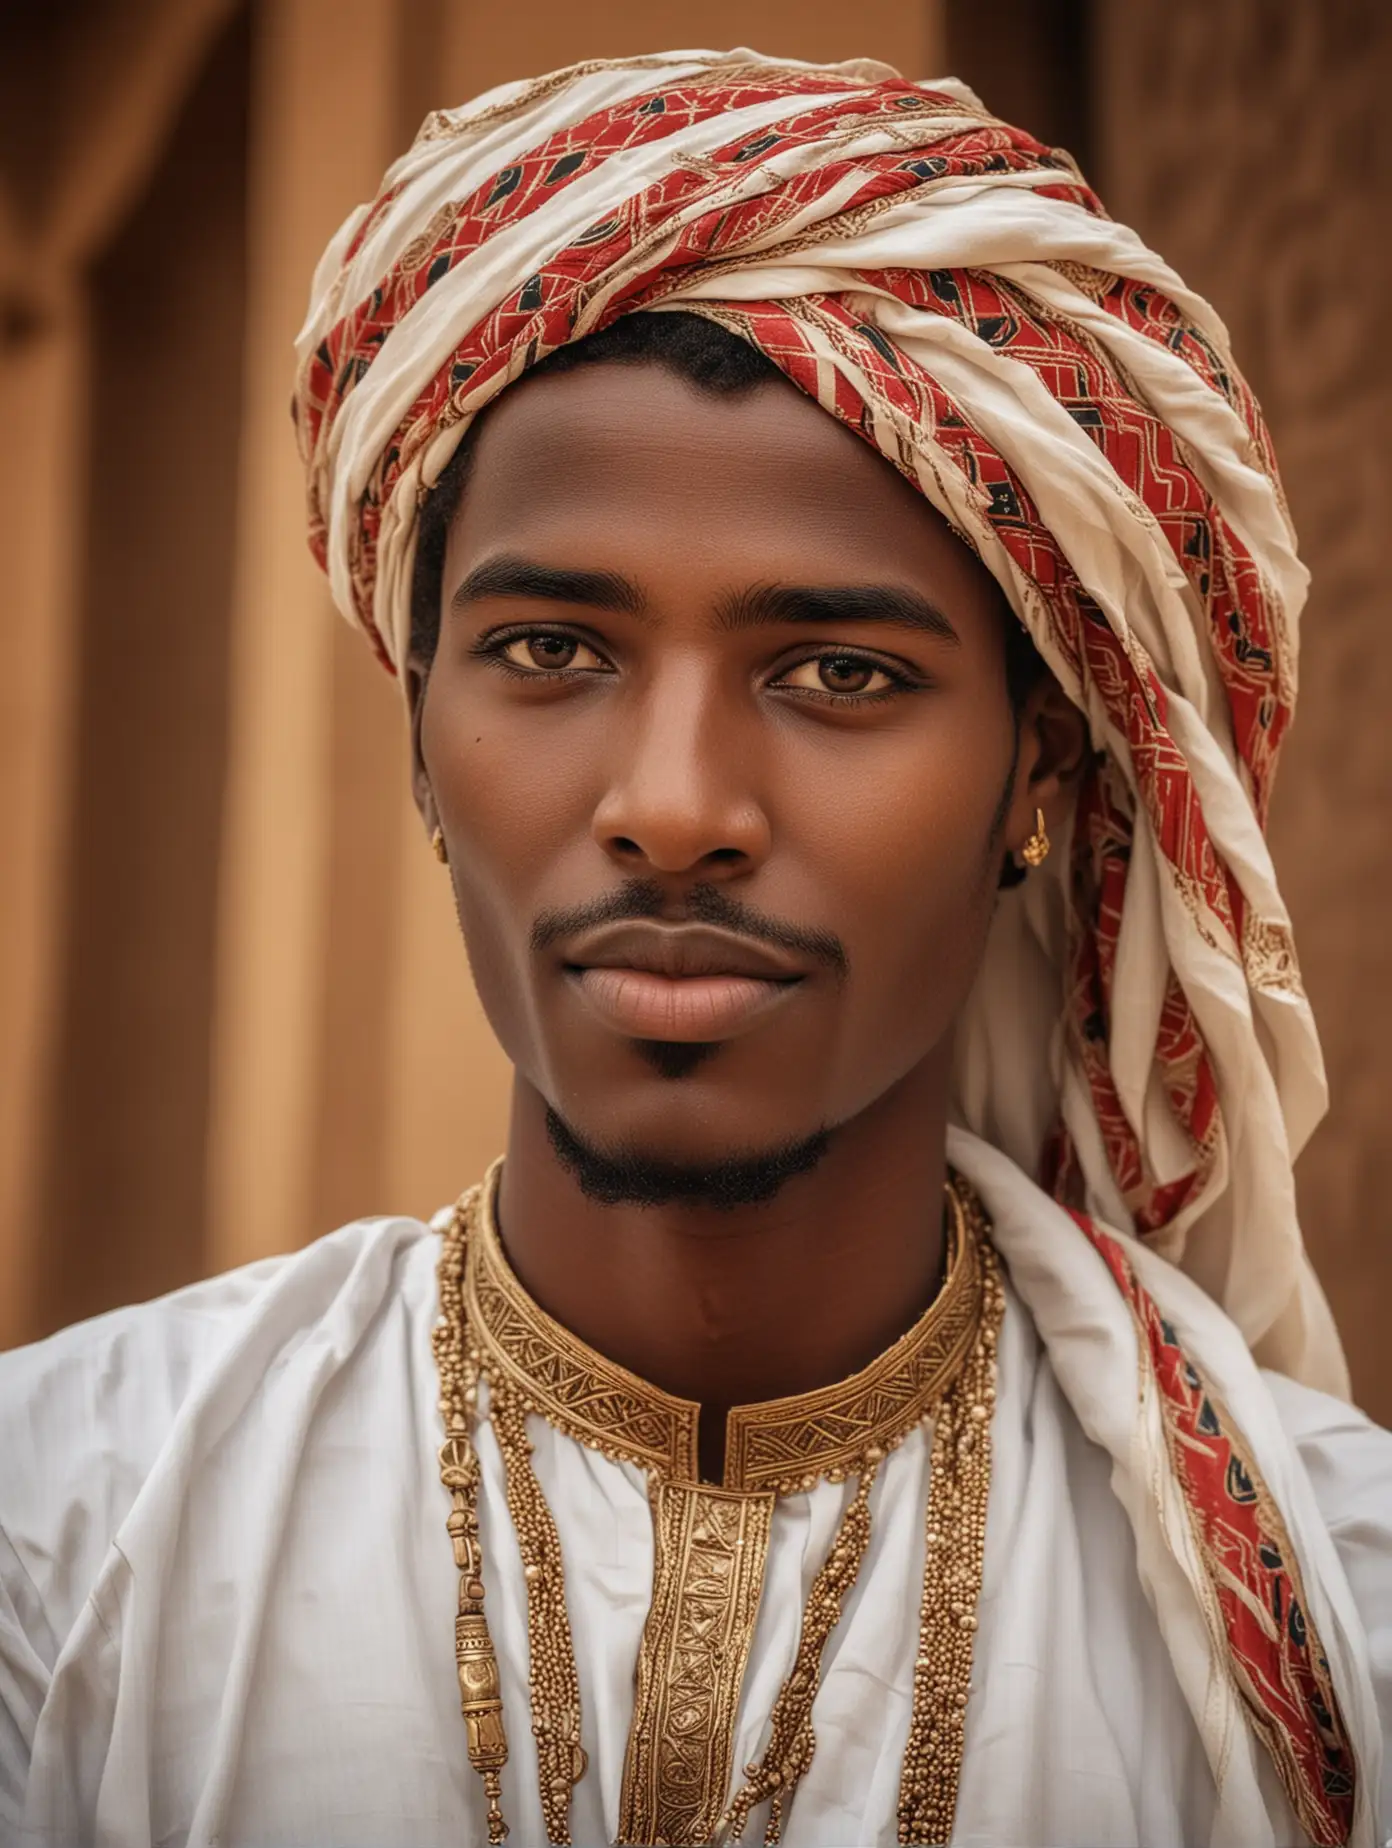 Handsome Sudanese Man in Traditional Clothing Against Iconic Sudanese Architecture